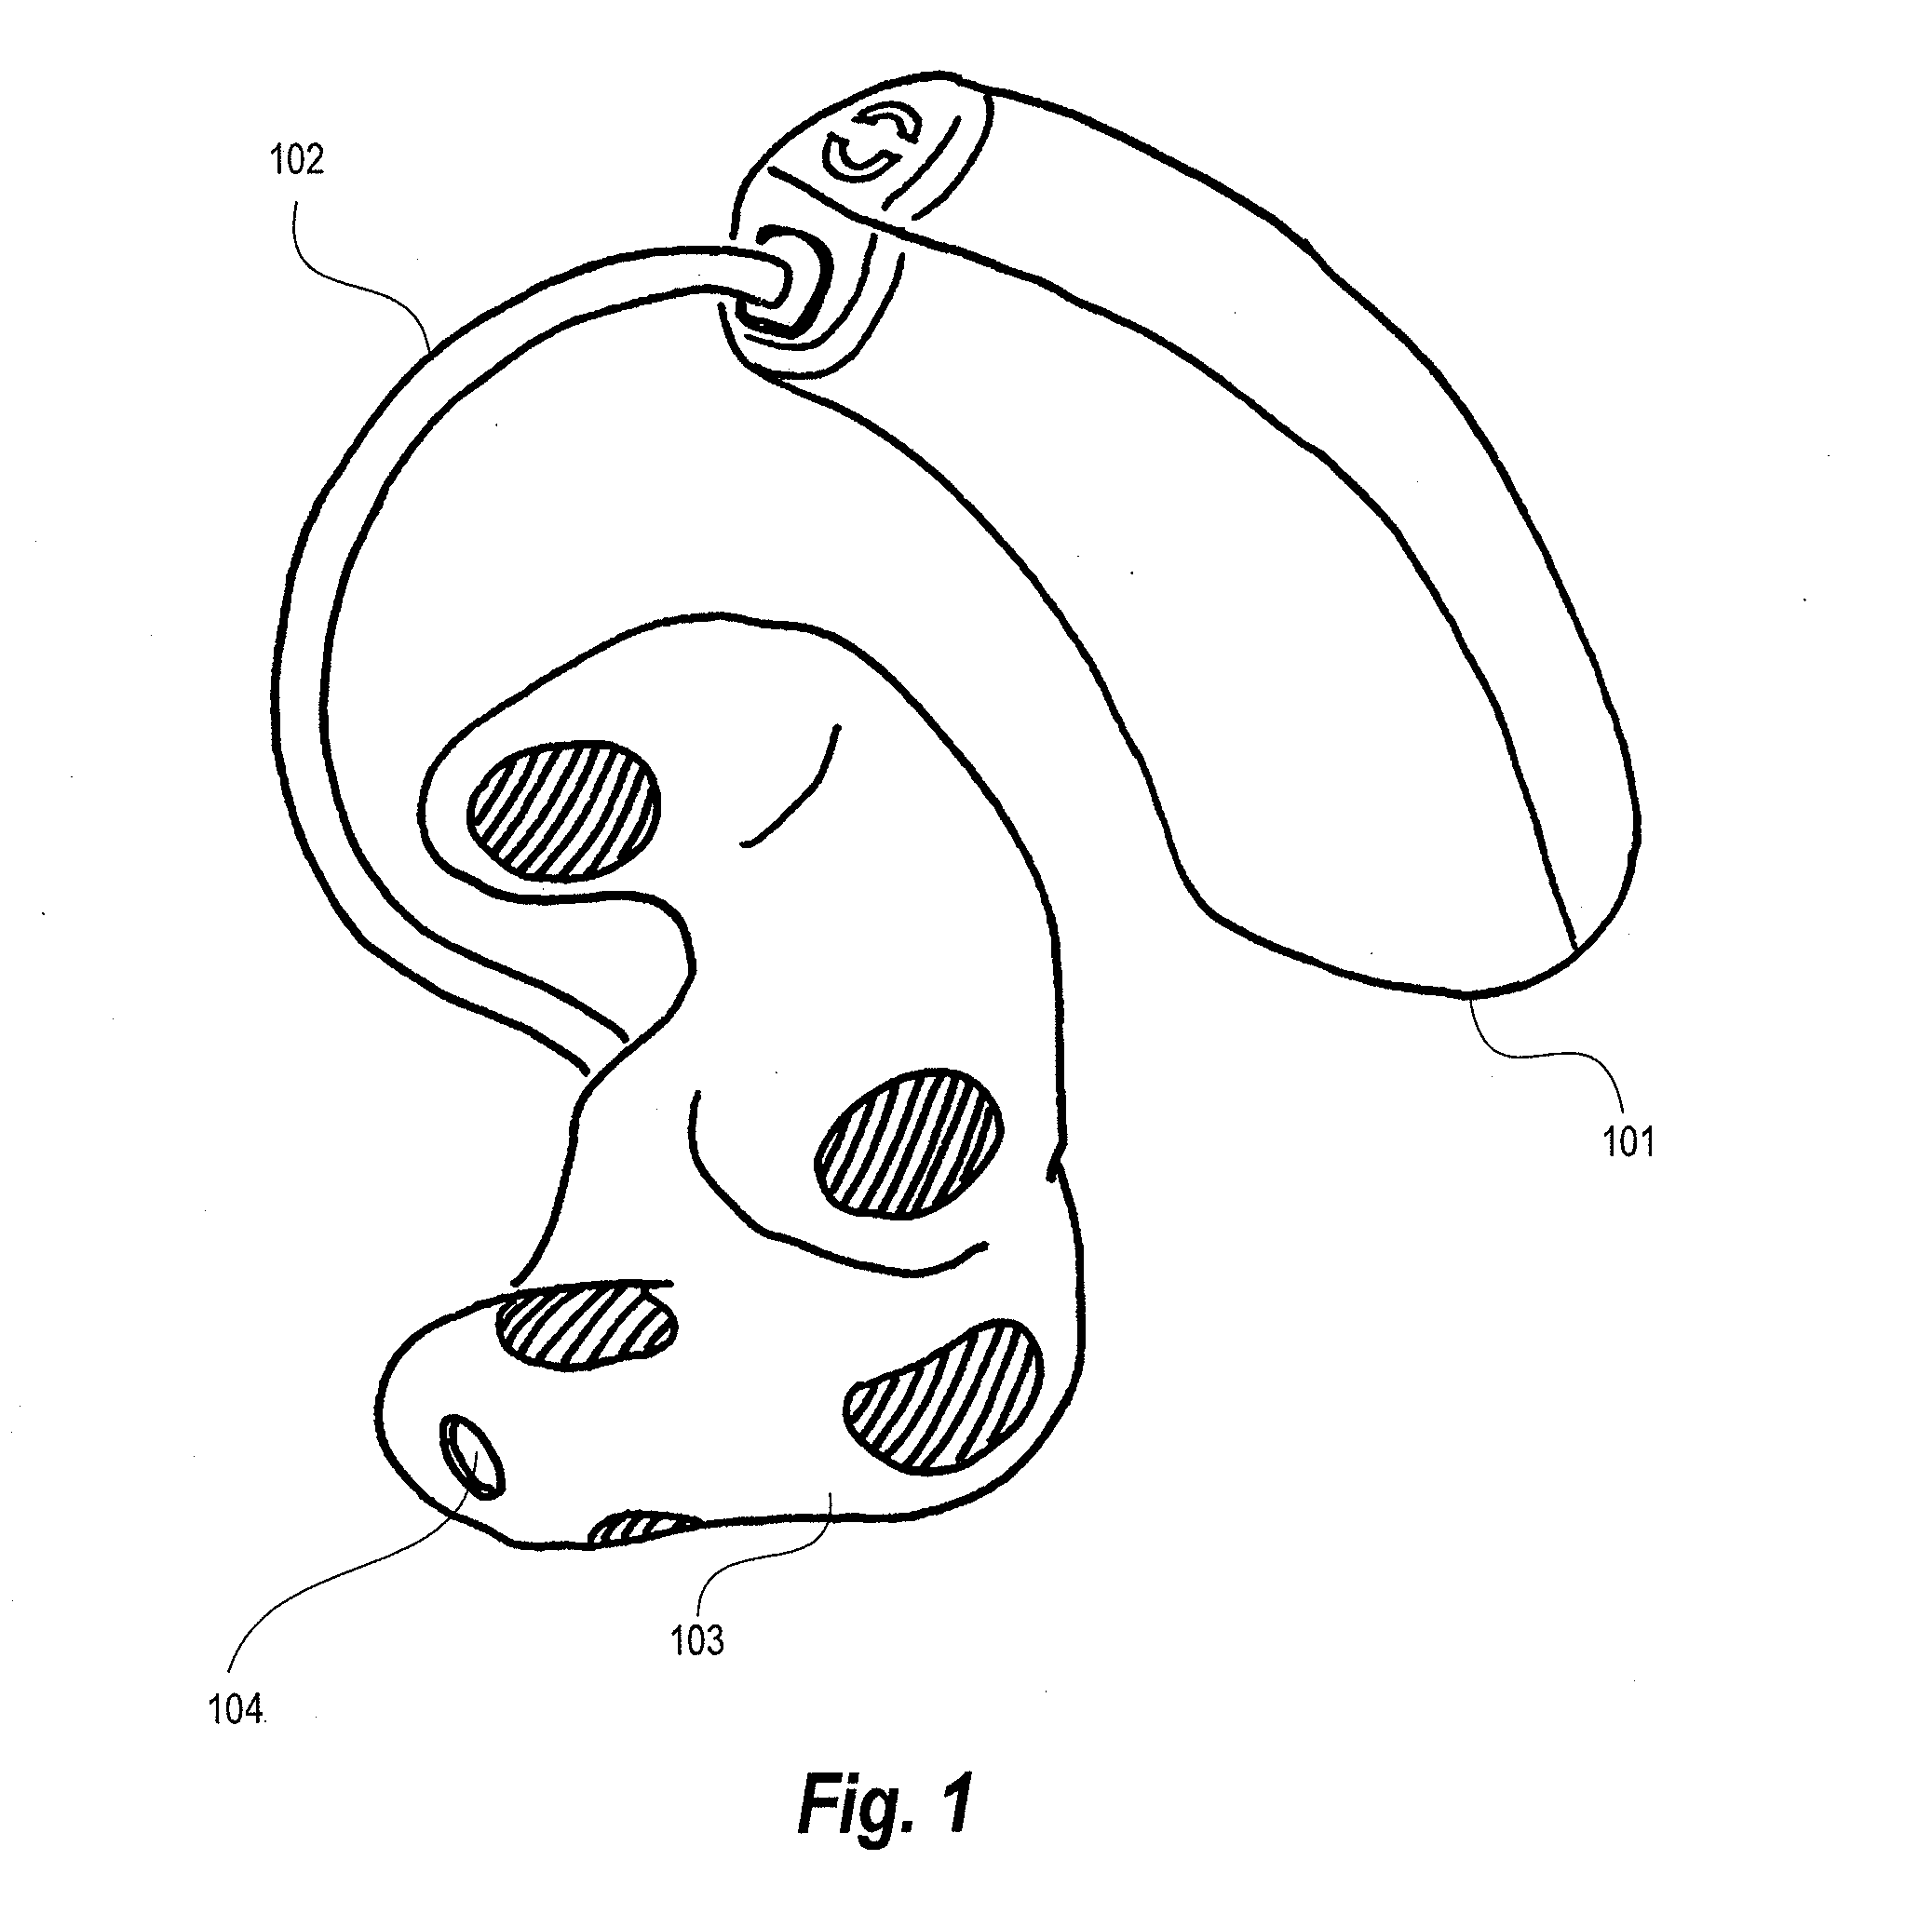 Ear plug with surface electrodes